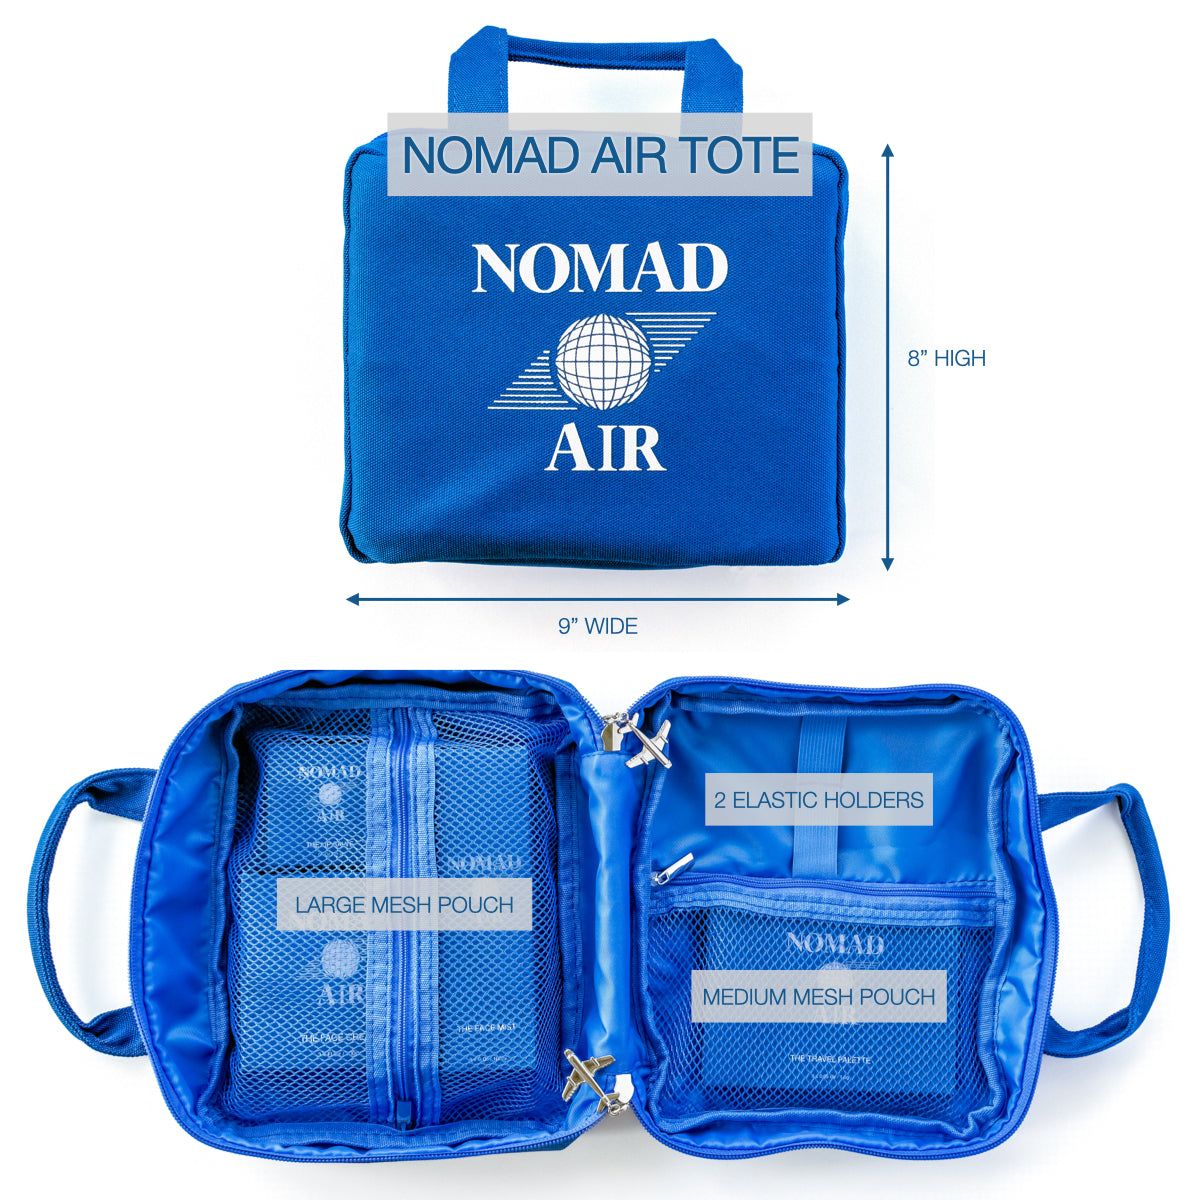 NOMAD Air - Frequent Flyer Collection